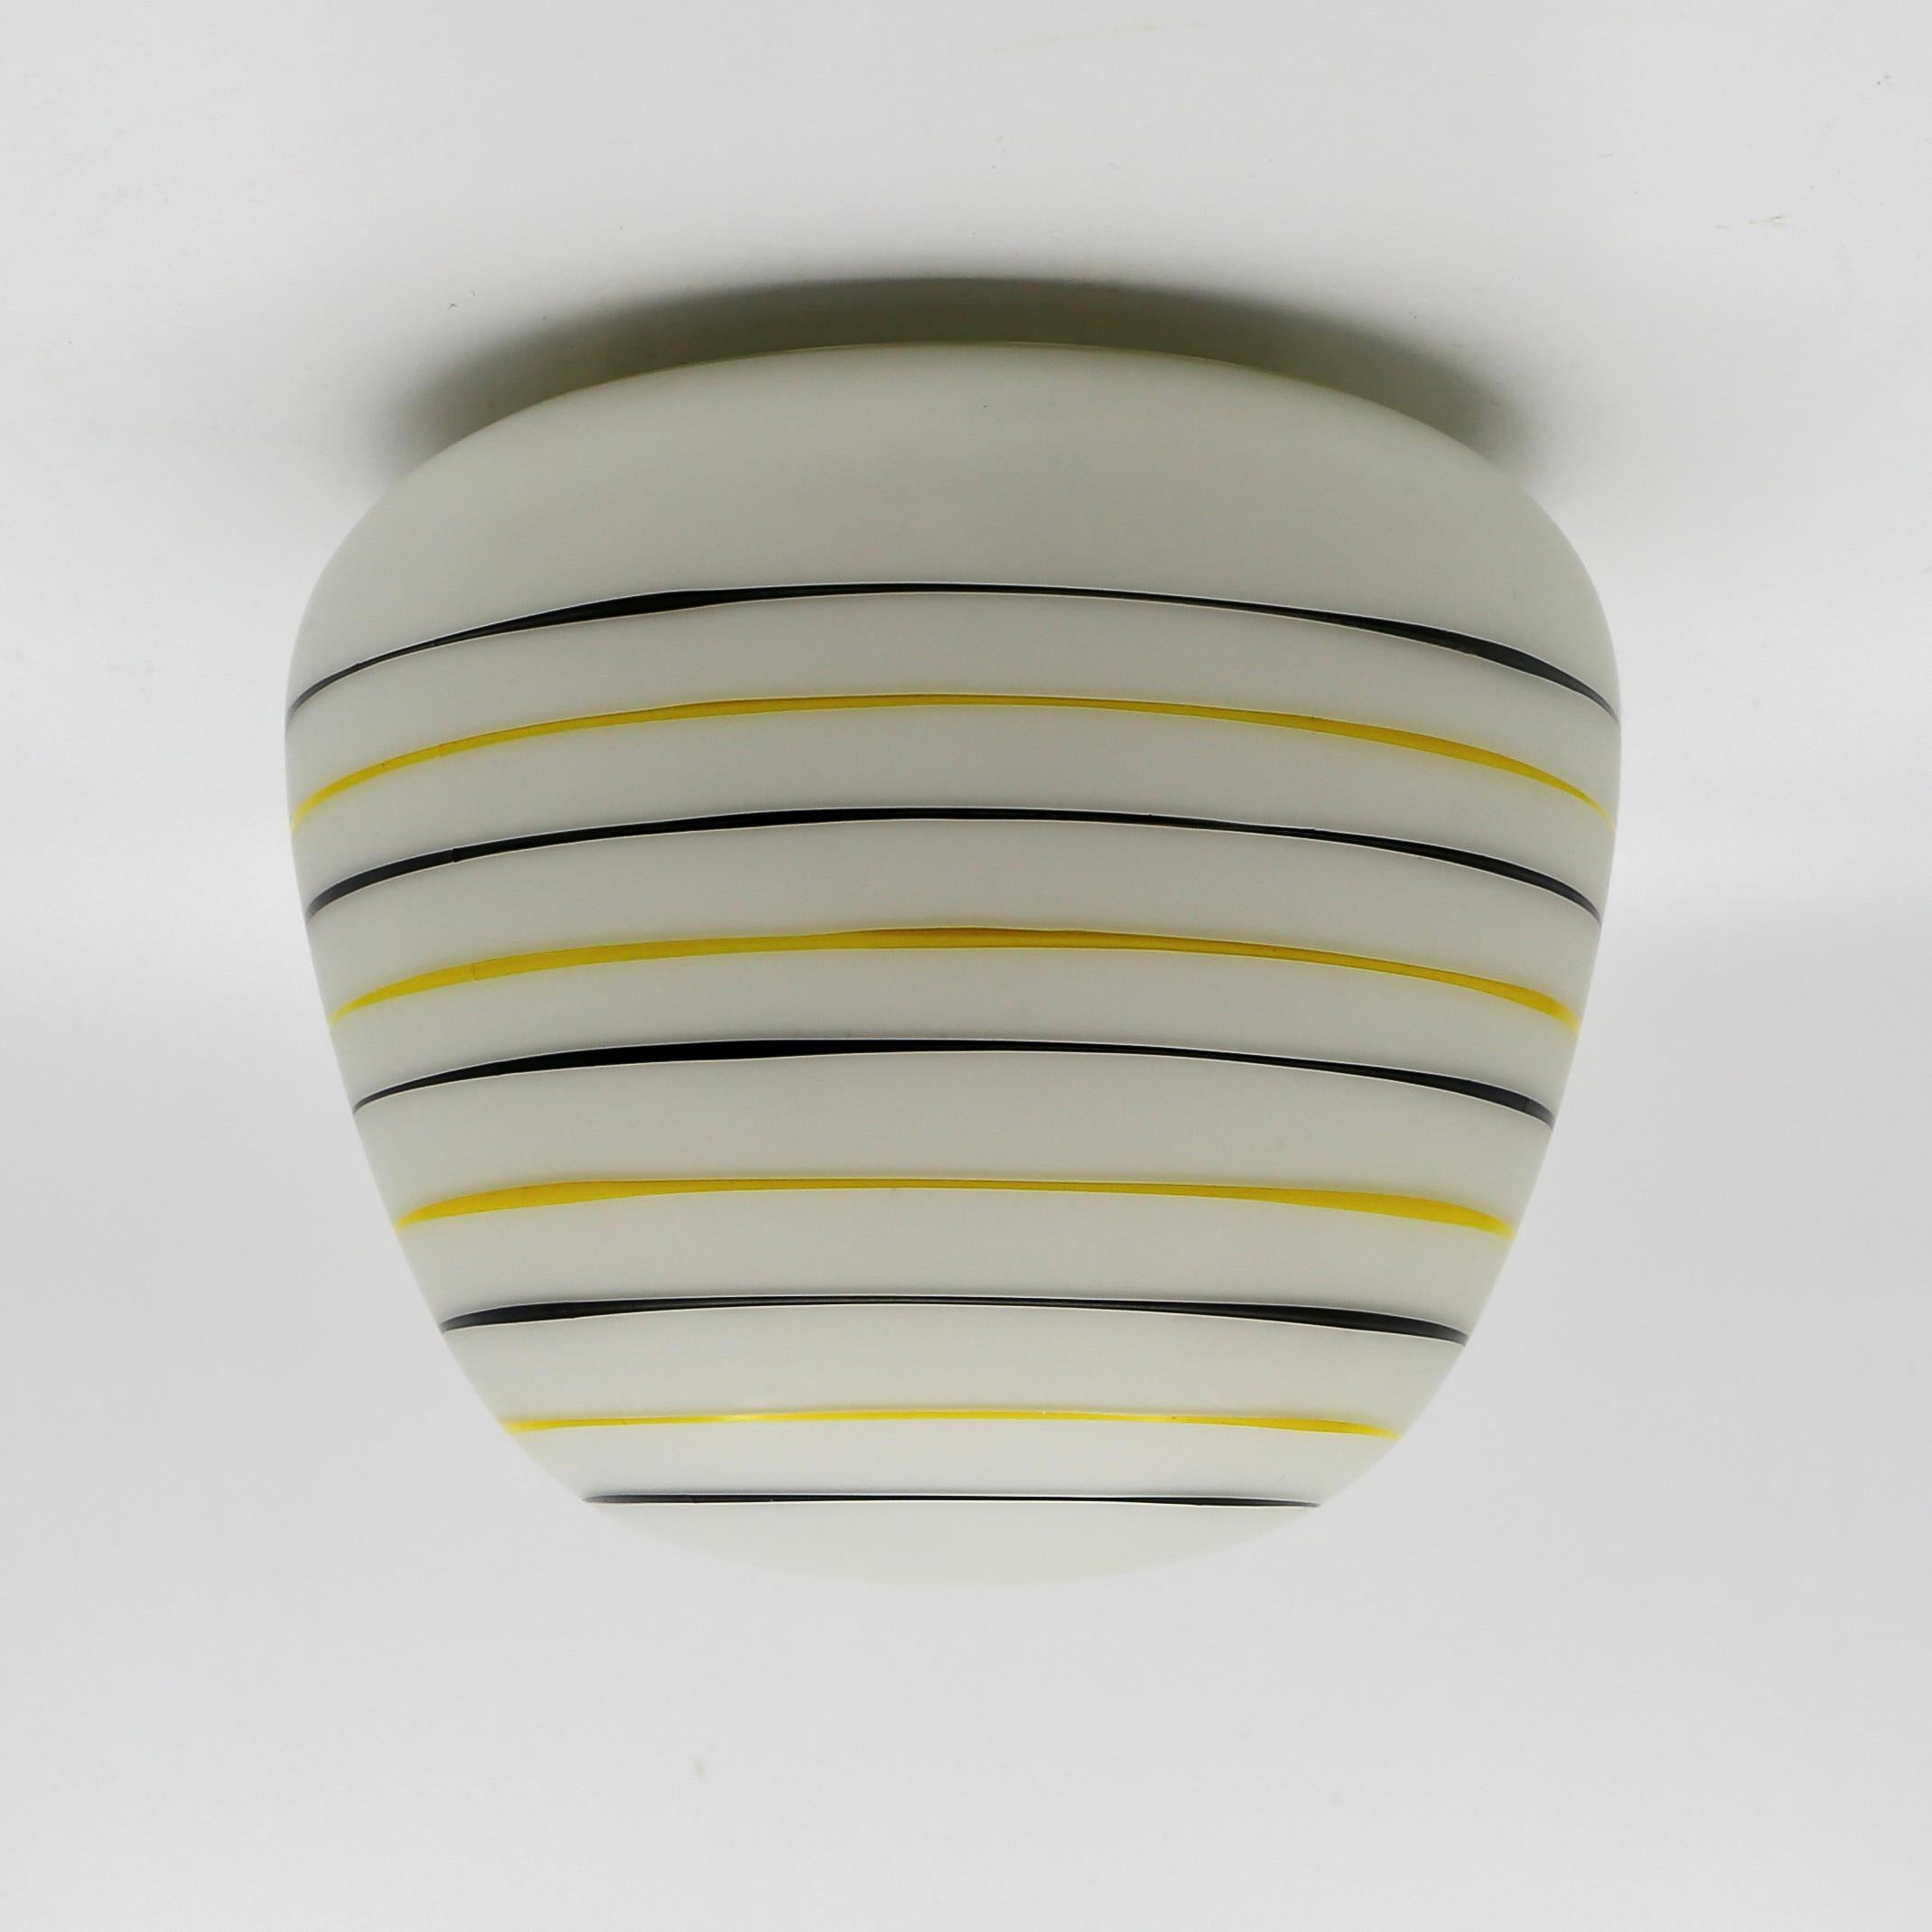 Beautiful glass vintage ceiling lamp from the 1950s/1960s by Philips Holland.

Production date: late 1950s
Produced by: Philips Holland
Material: glass and bakelite
Colors: decorative yellow and black lines on white glass.
Condition: the glass shade